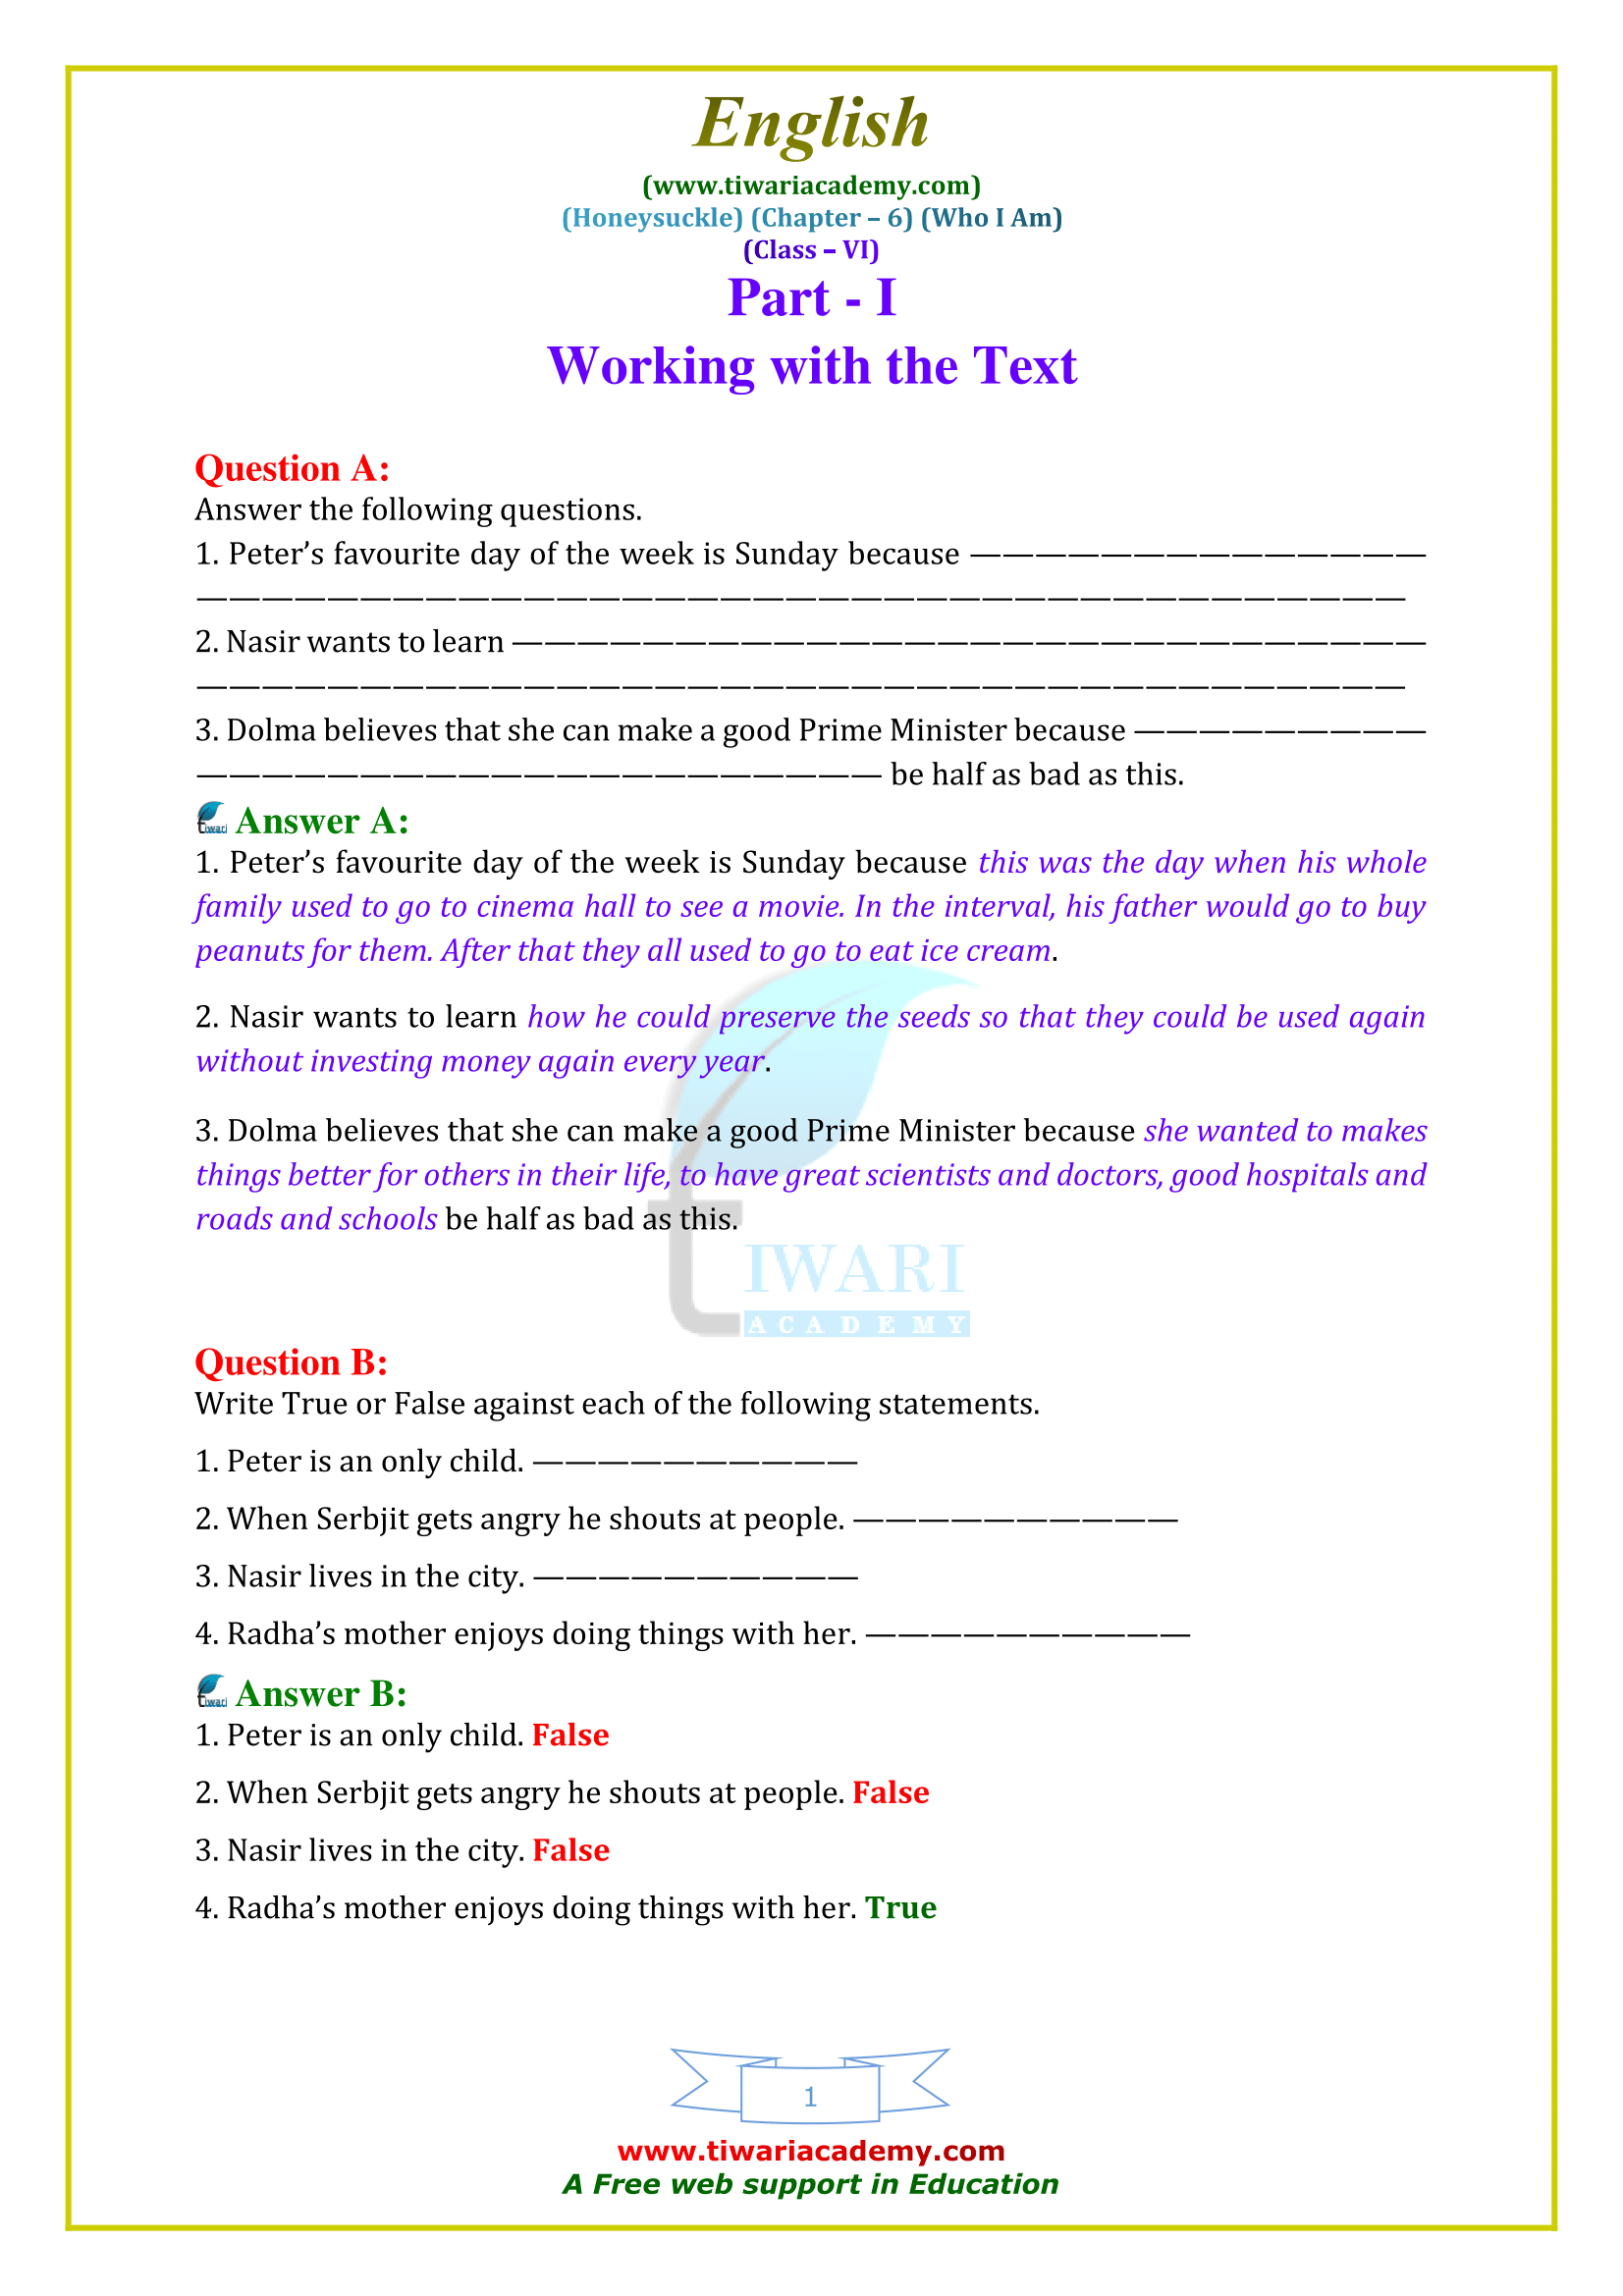 NCERT Solutions for Class 6 English Honeysuckle Chapter 6 Who I Am